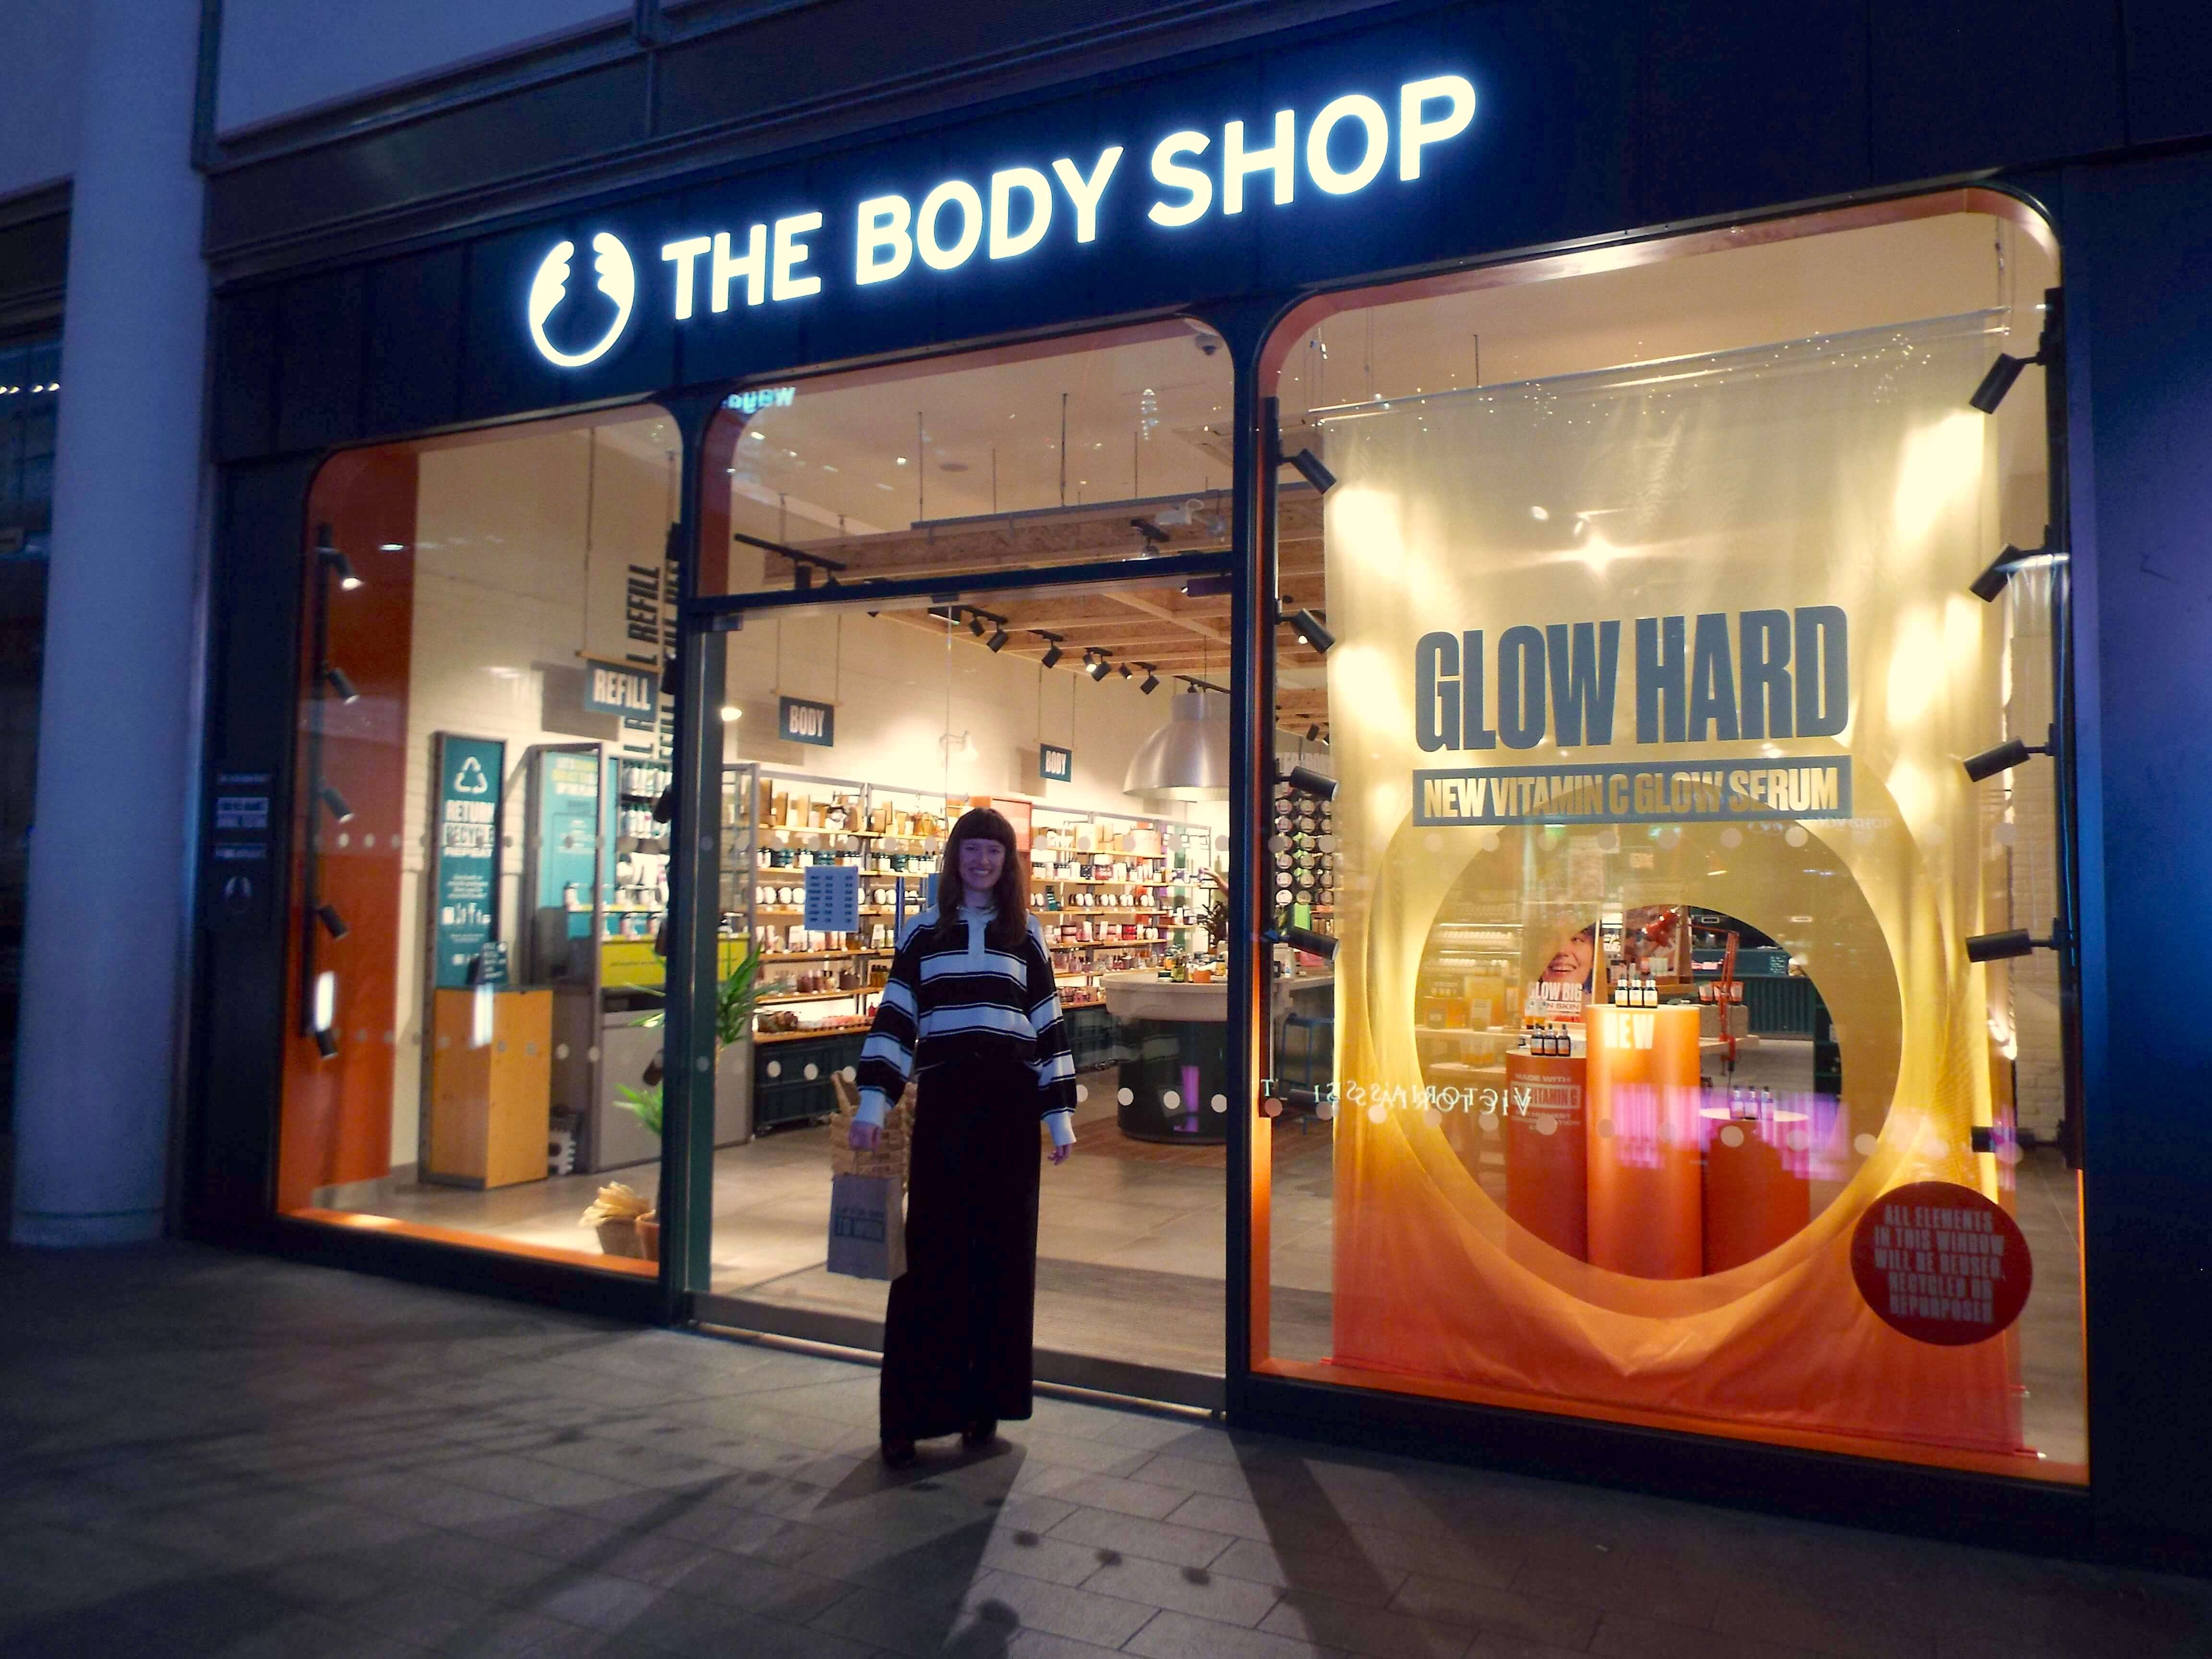 Again, Ellie posing outside the warmly-lit Body Shop store, with goodie bag.